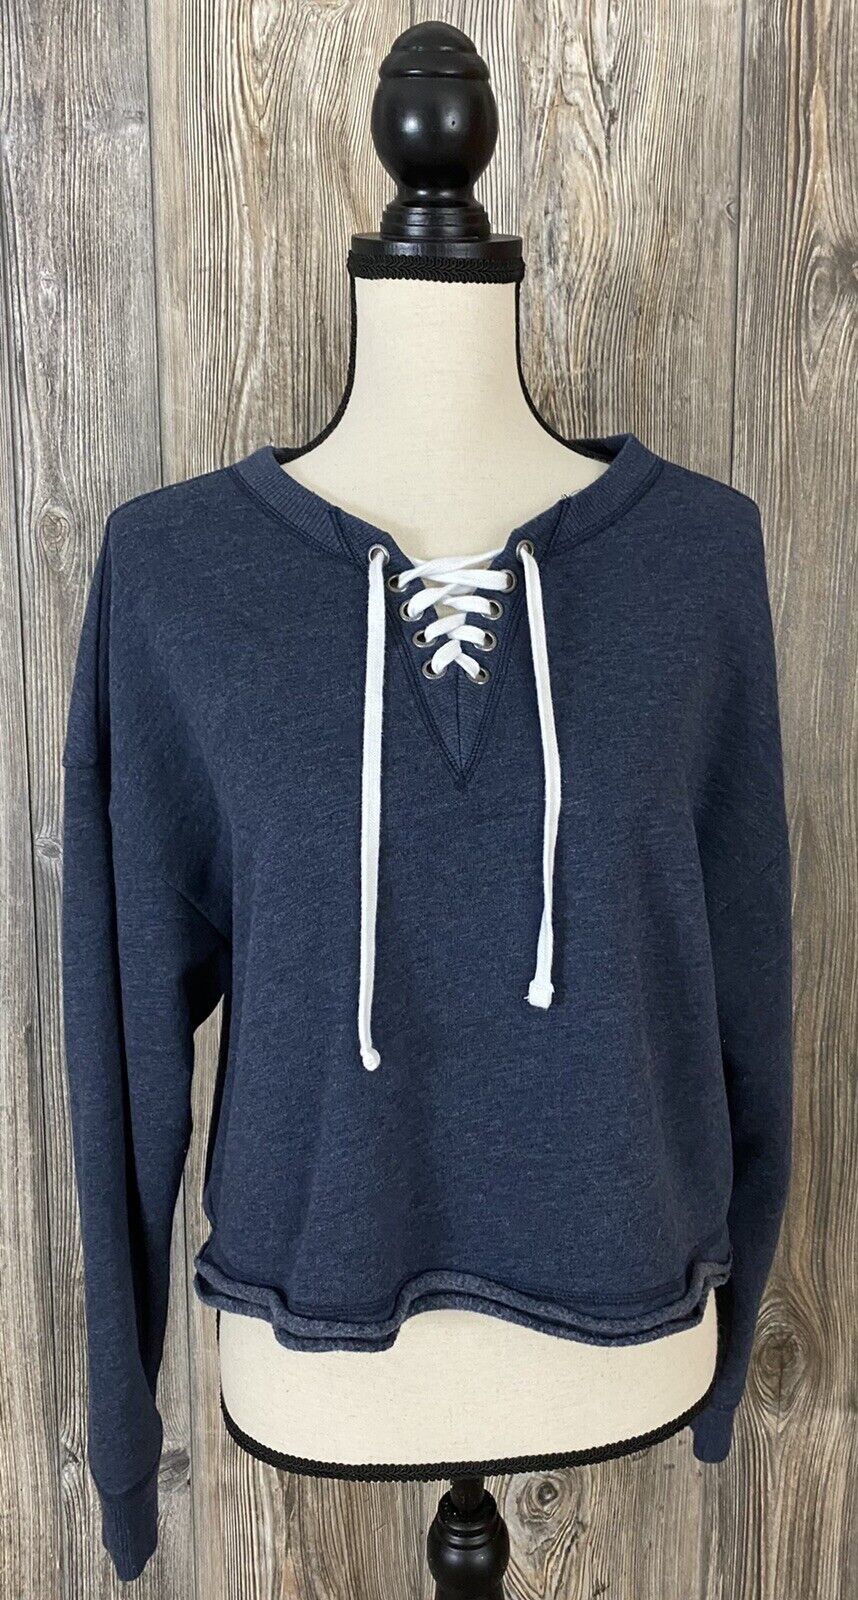 Primary image for HOLLISTER Cropped Sweatshirt Women's Small Heather Blue, Raw Hem, Boxy fit